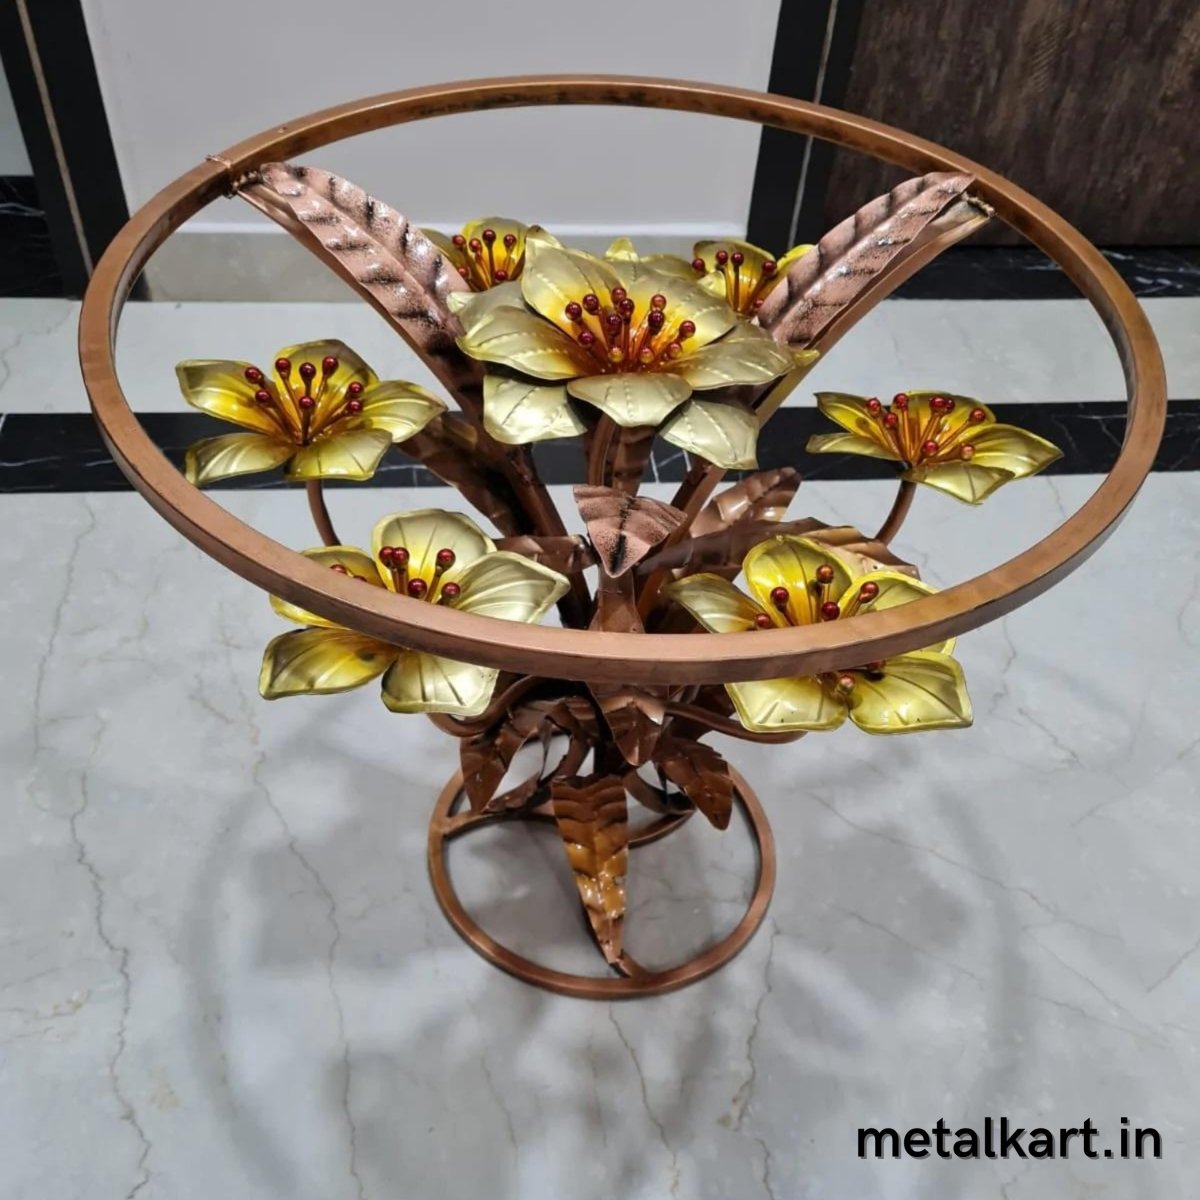 Metallic Multipurpose Flowery Center Table With Glass Top For living room (22.5*22.5*20 Inches approx)